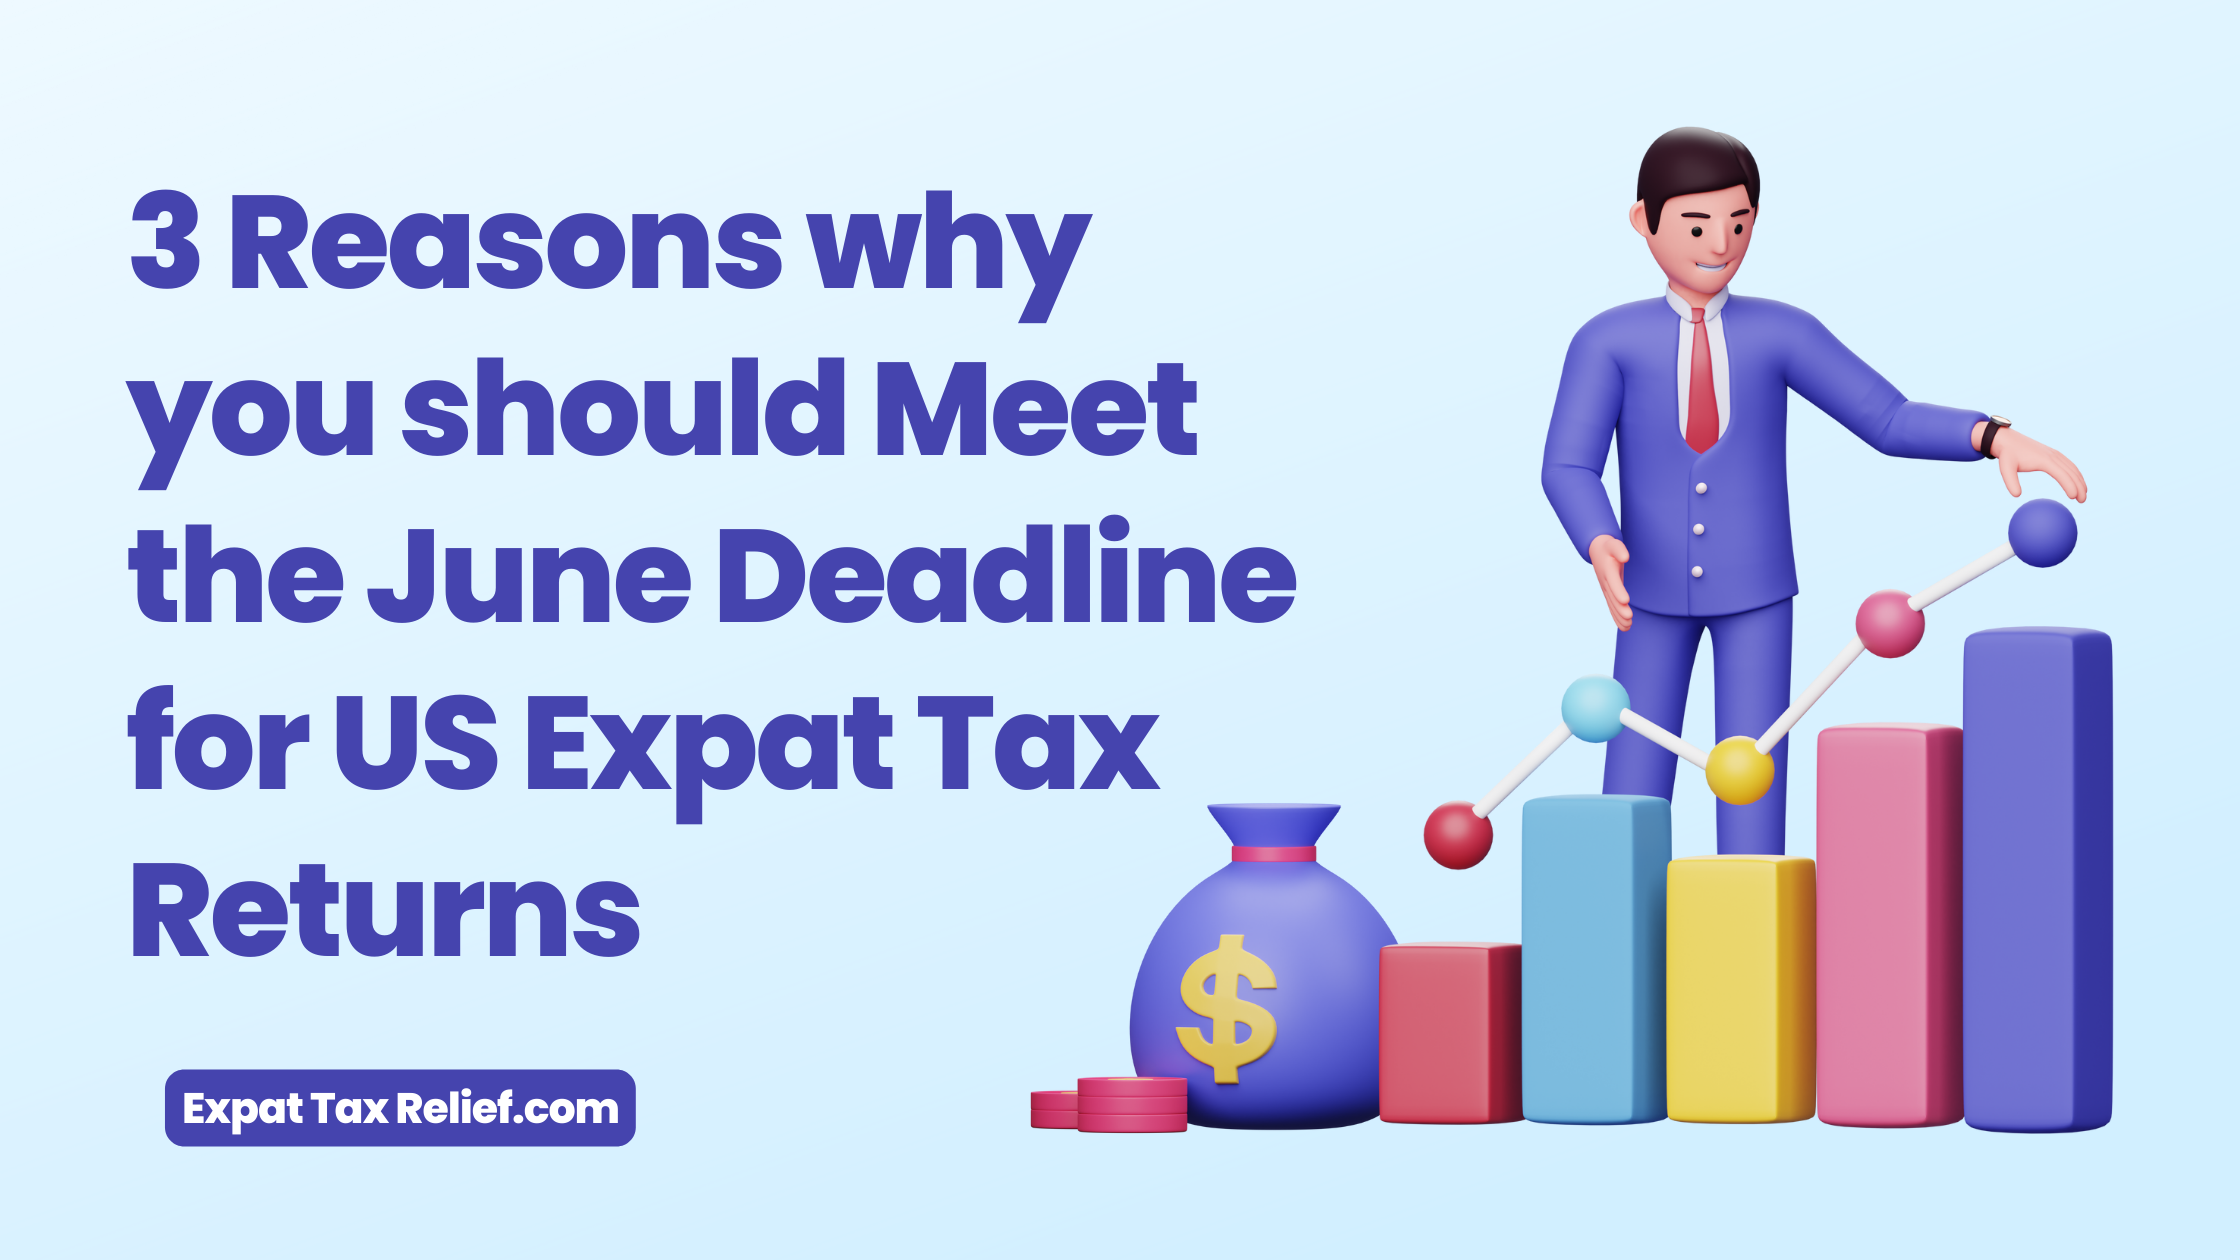 3 Reasons why you should Meet the June Deadline for US Expat Tax